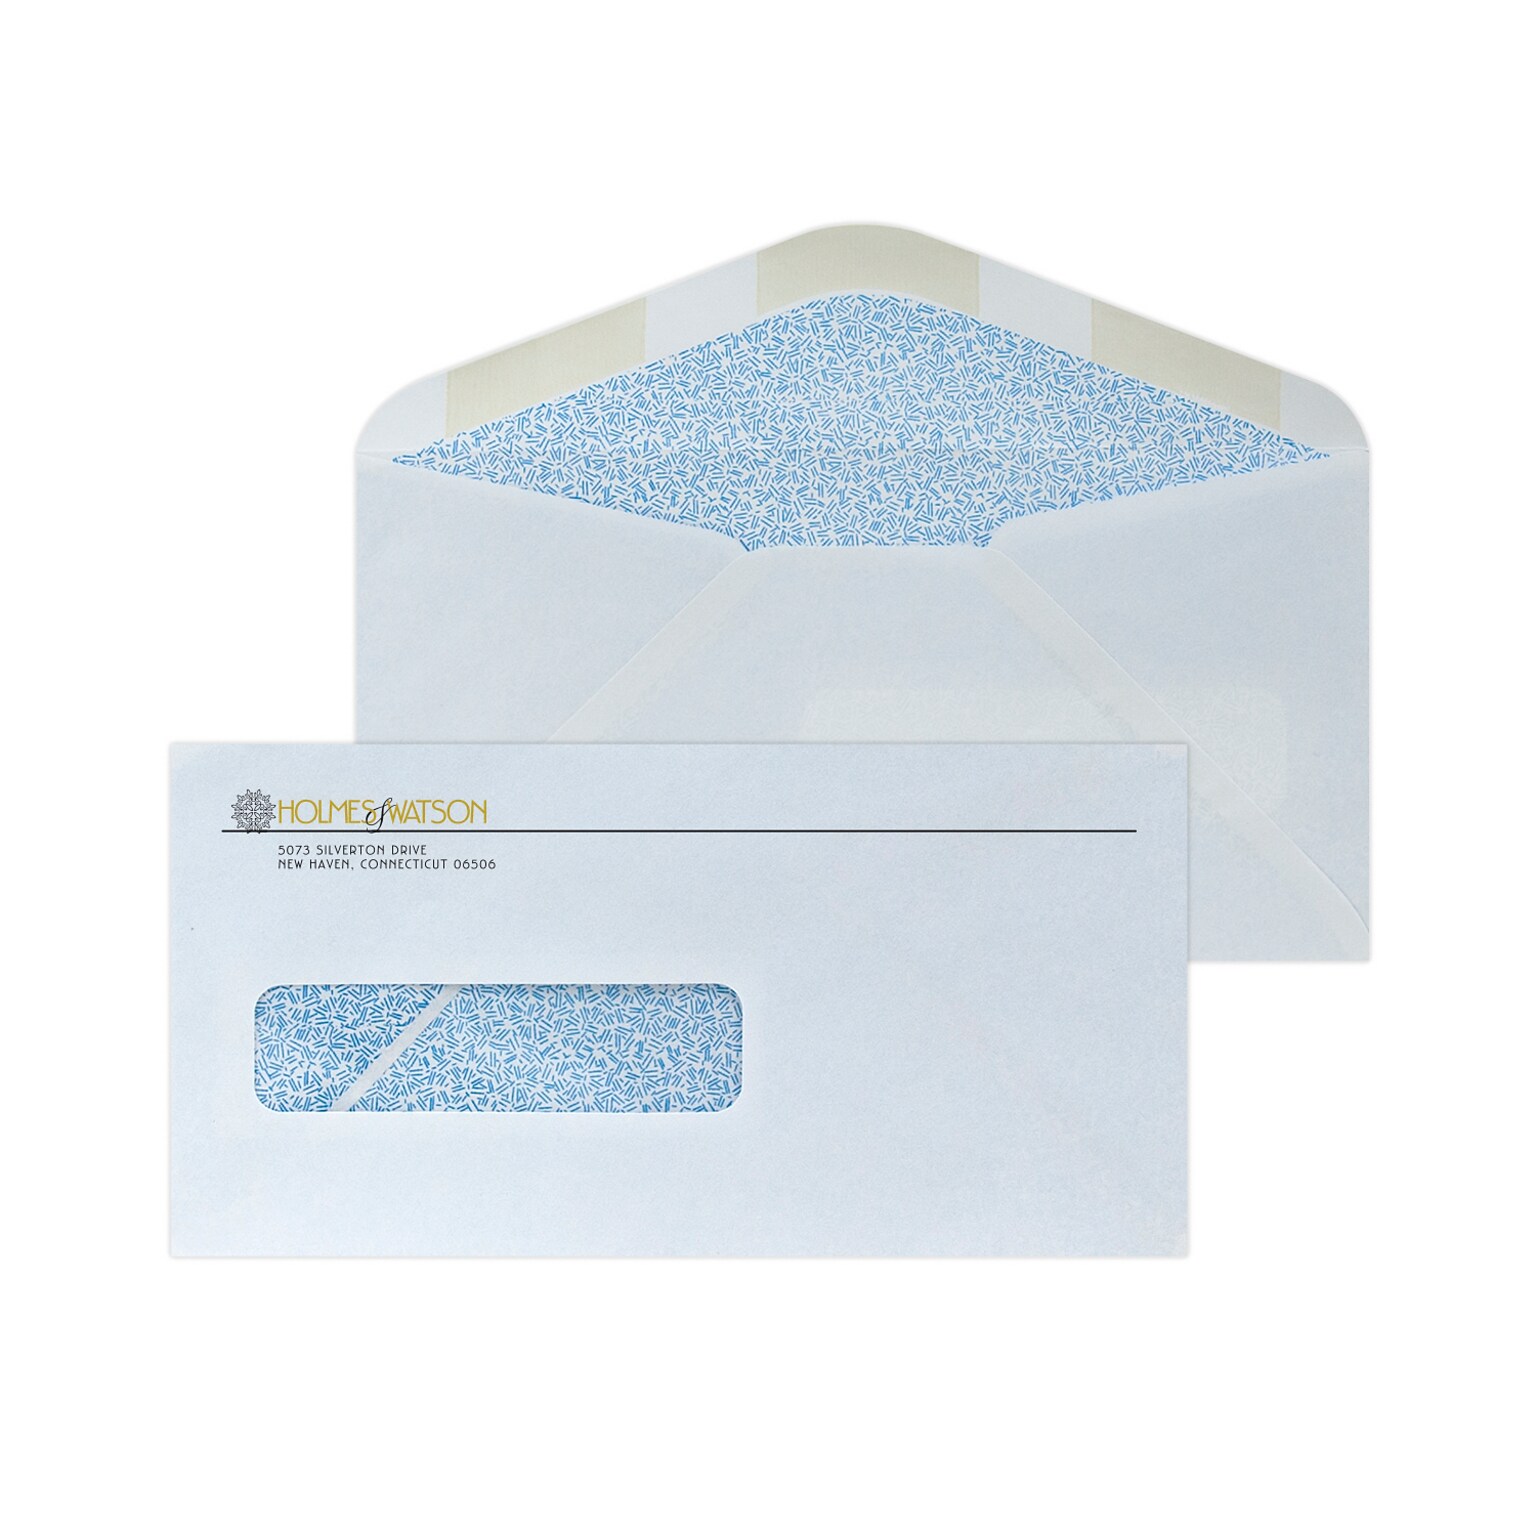 Custom 4-1/2x9 Insurance Claim Left Window Envelopes with Security Tint, 24# White Wove, 1 Std and 1 Custom Inks, 250/Pack